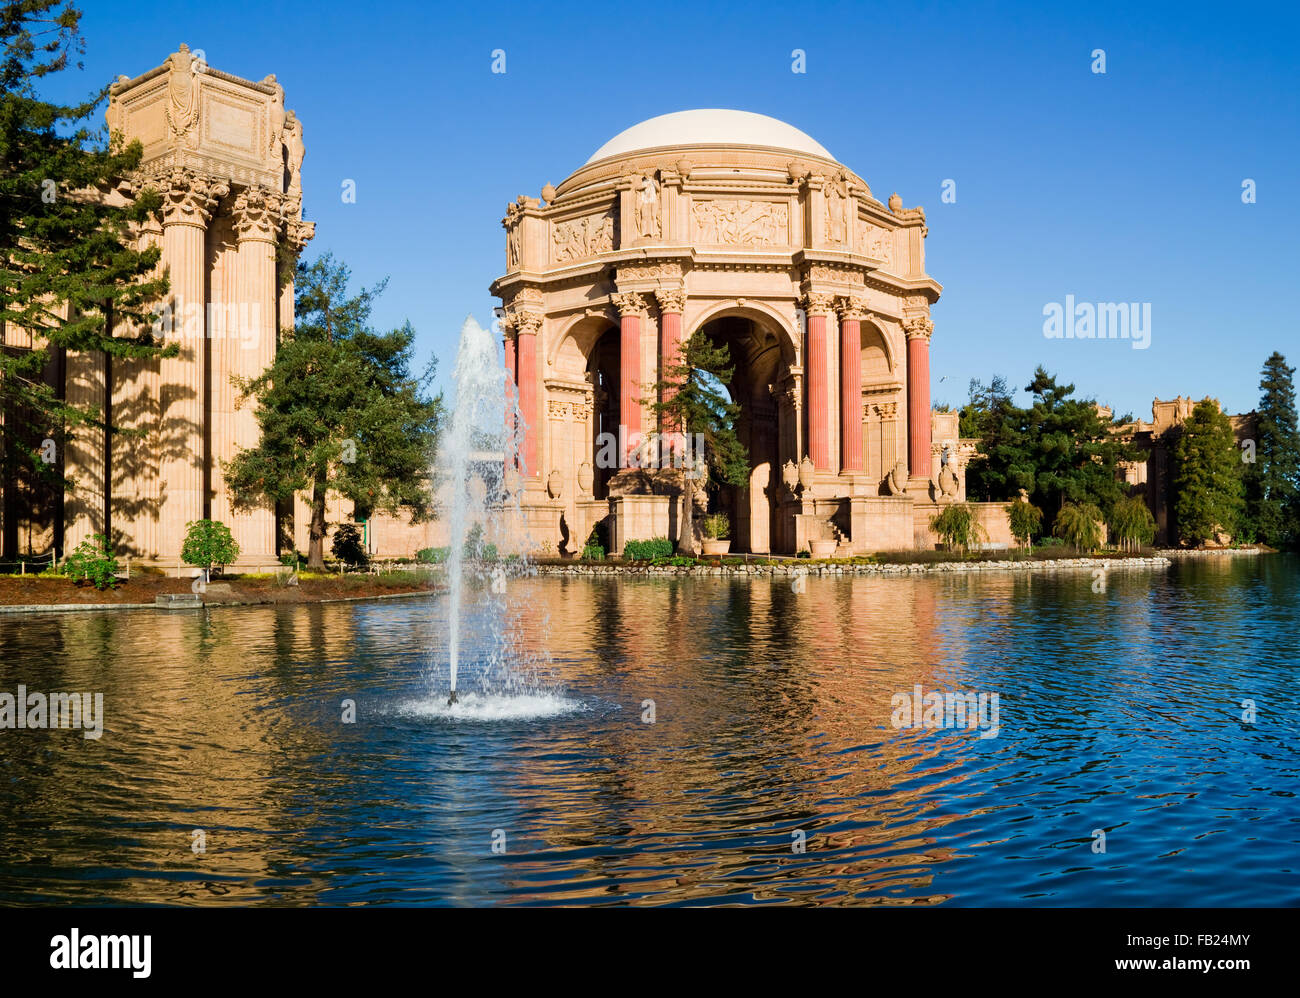 Palace of fine Arts in San Francisco Stock Photo